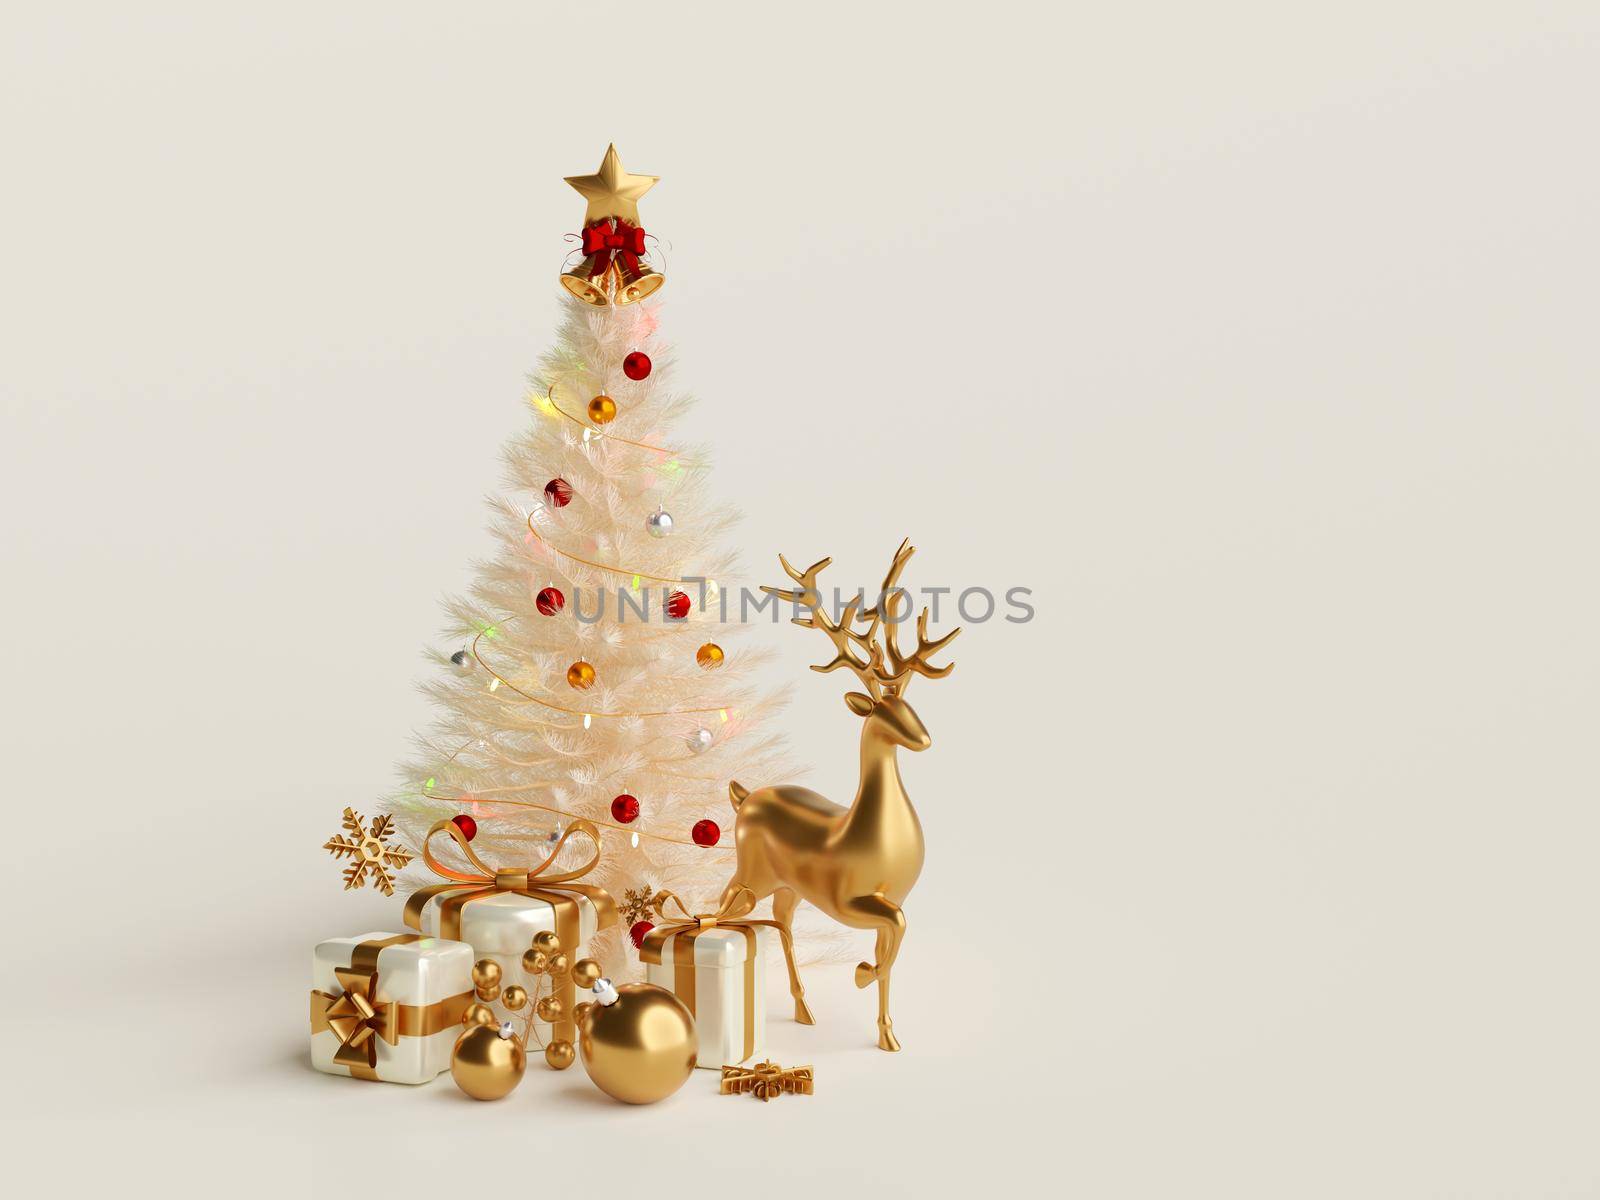 3d illustration Christmas banner of Reindeer with Christmas tree, gift box and decoration by nutzchotwarut